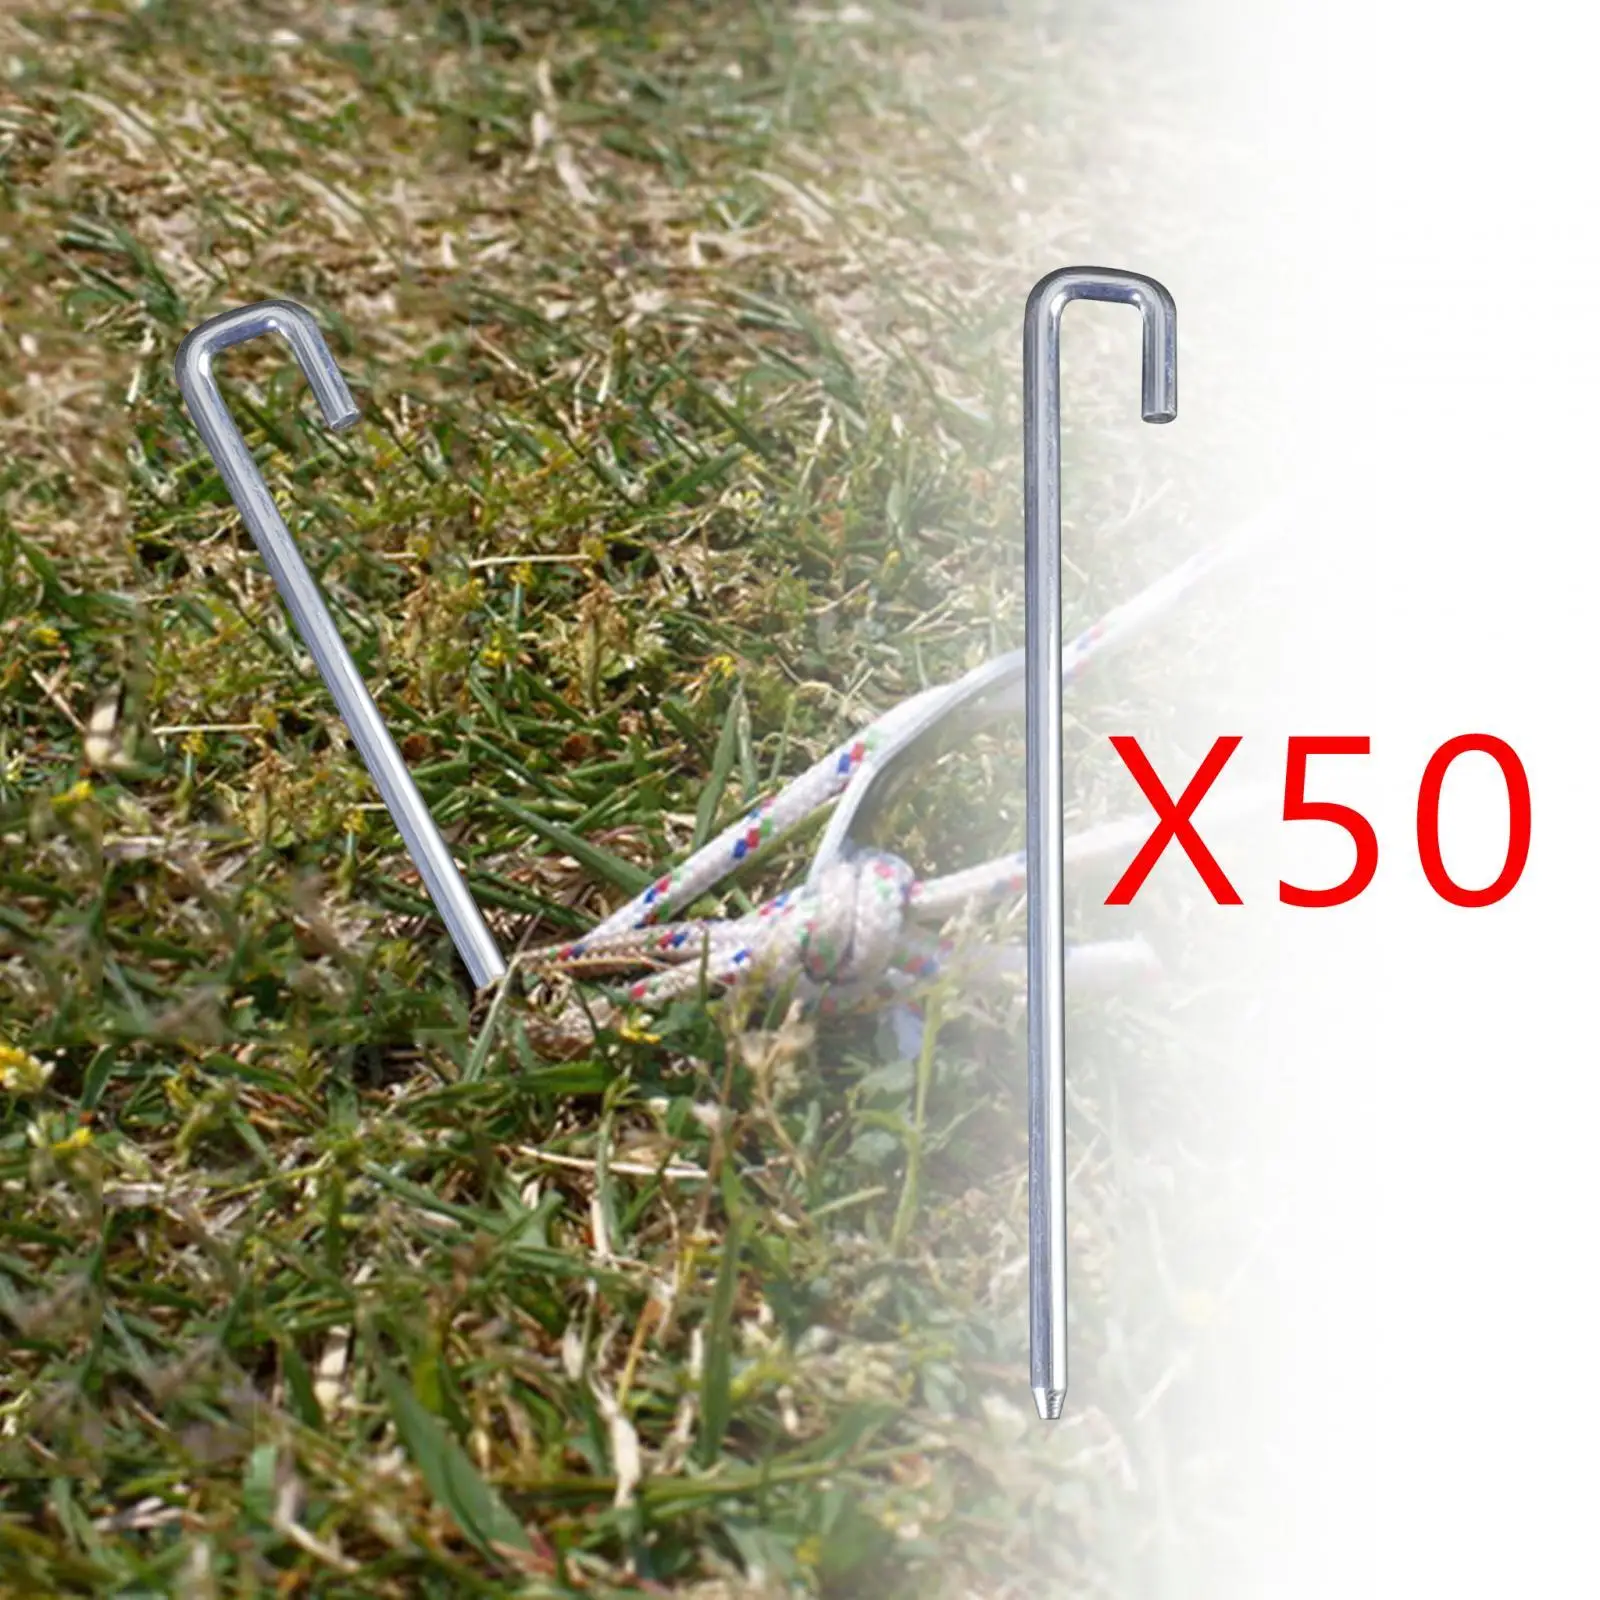 50 Pieces Tent Pegs 250mm Tent Nails U Shape Hook Aluminum Accessory for Trampolines, Sheds Multipurpose Durable Ground Spikes